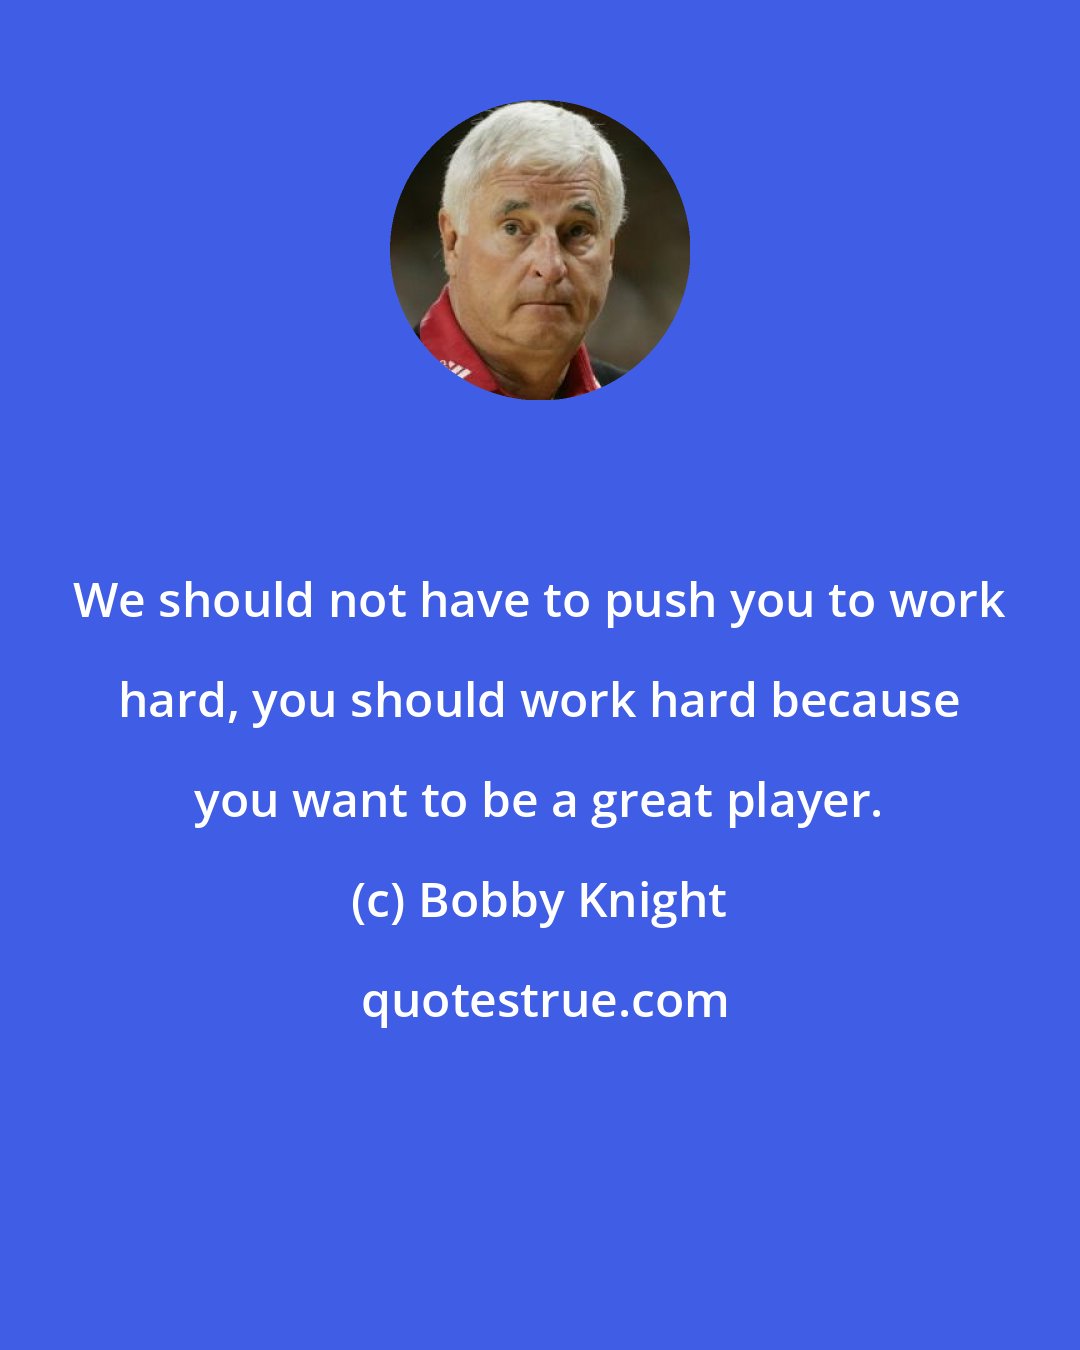 Bobby Knight: We should not have to push you to work hard, you should work hard because you want to be a great player.